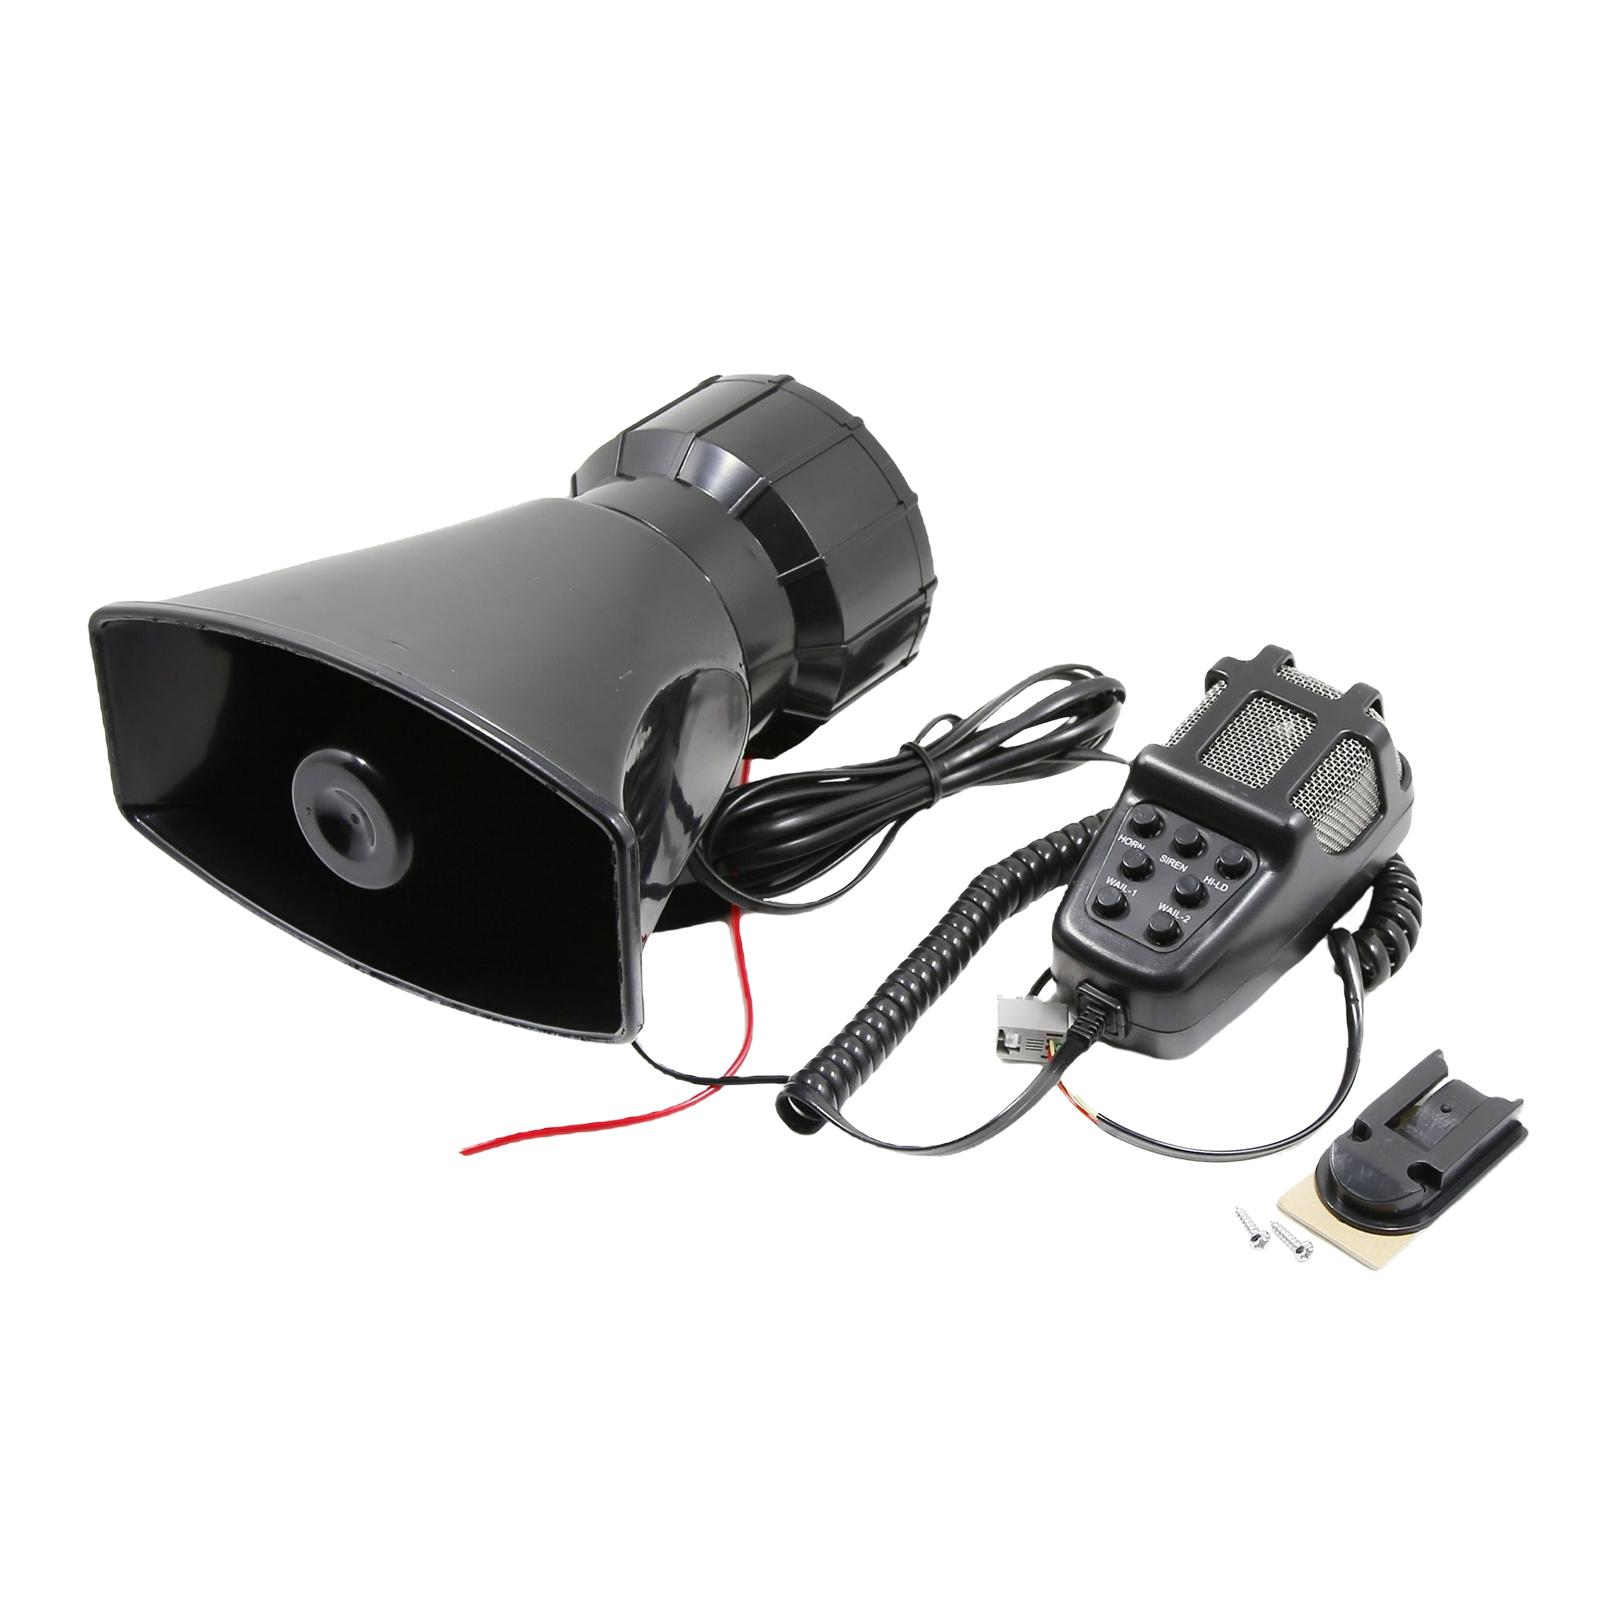 Car Siren Speaker 100W 7 Tone with Mic PA System Fit for Ship 12V Car